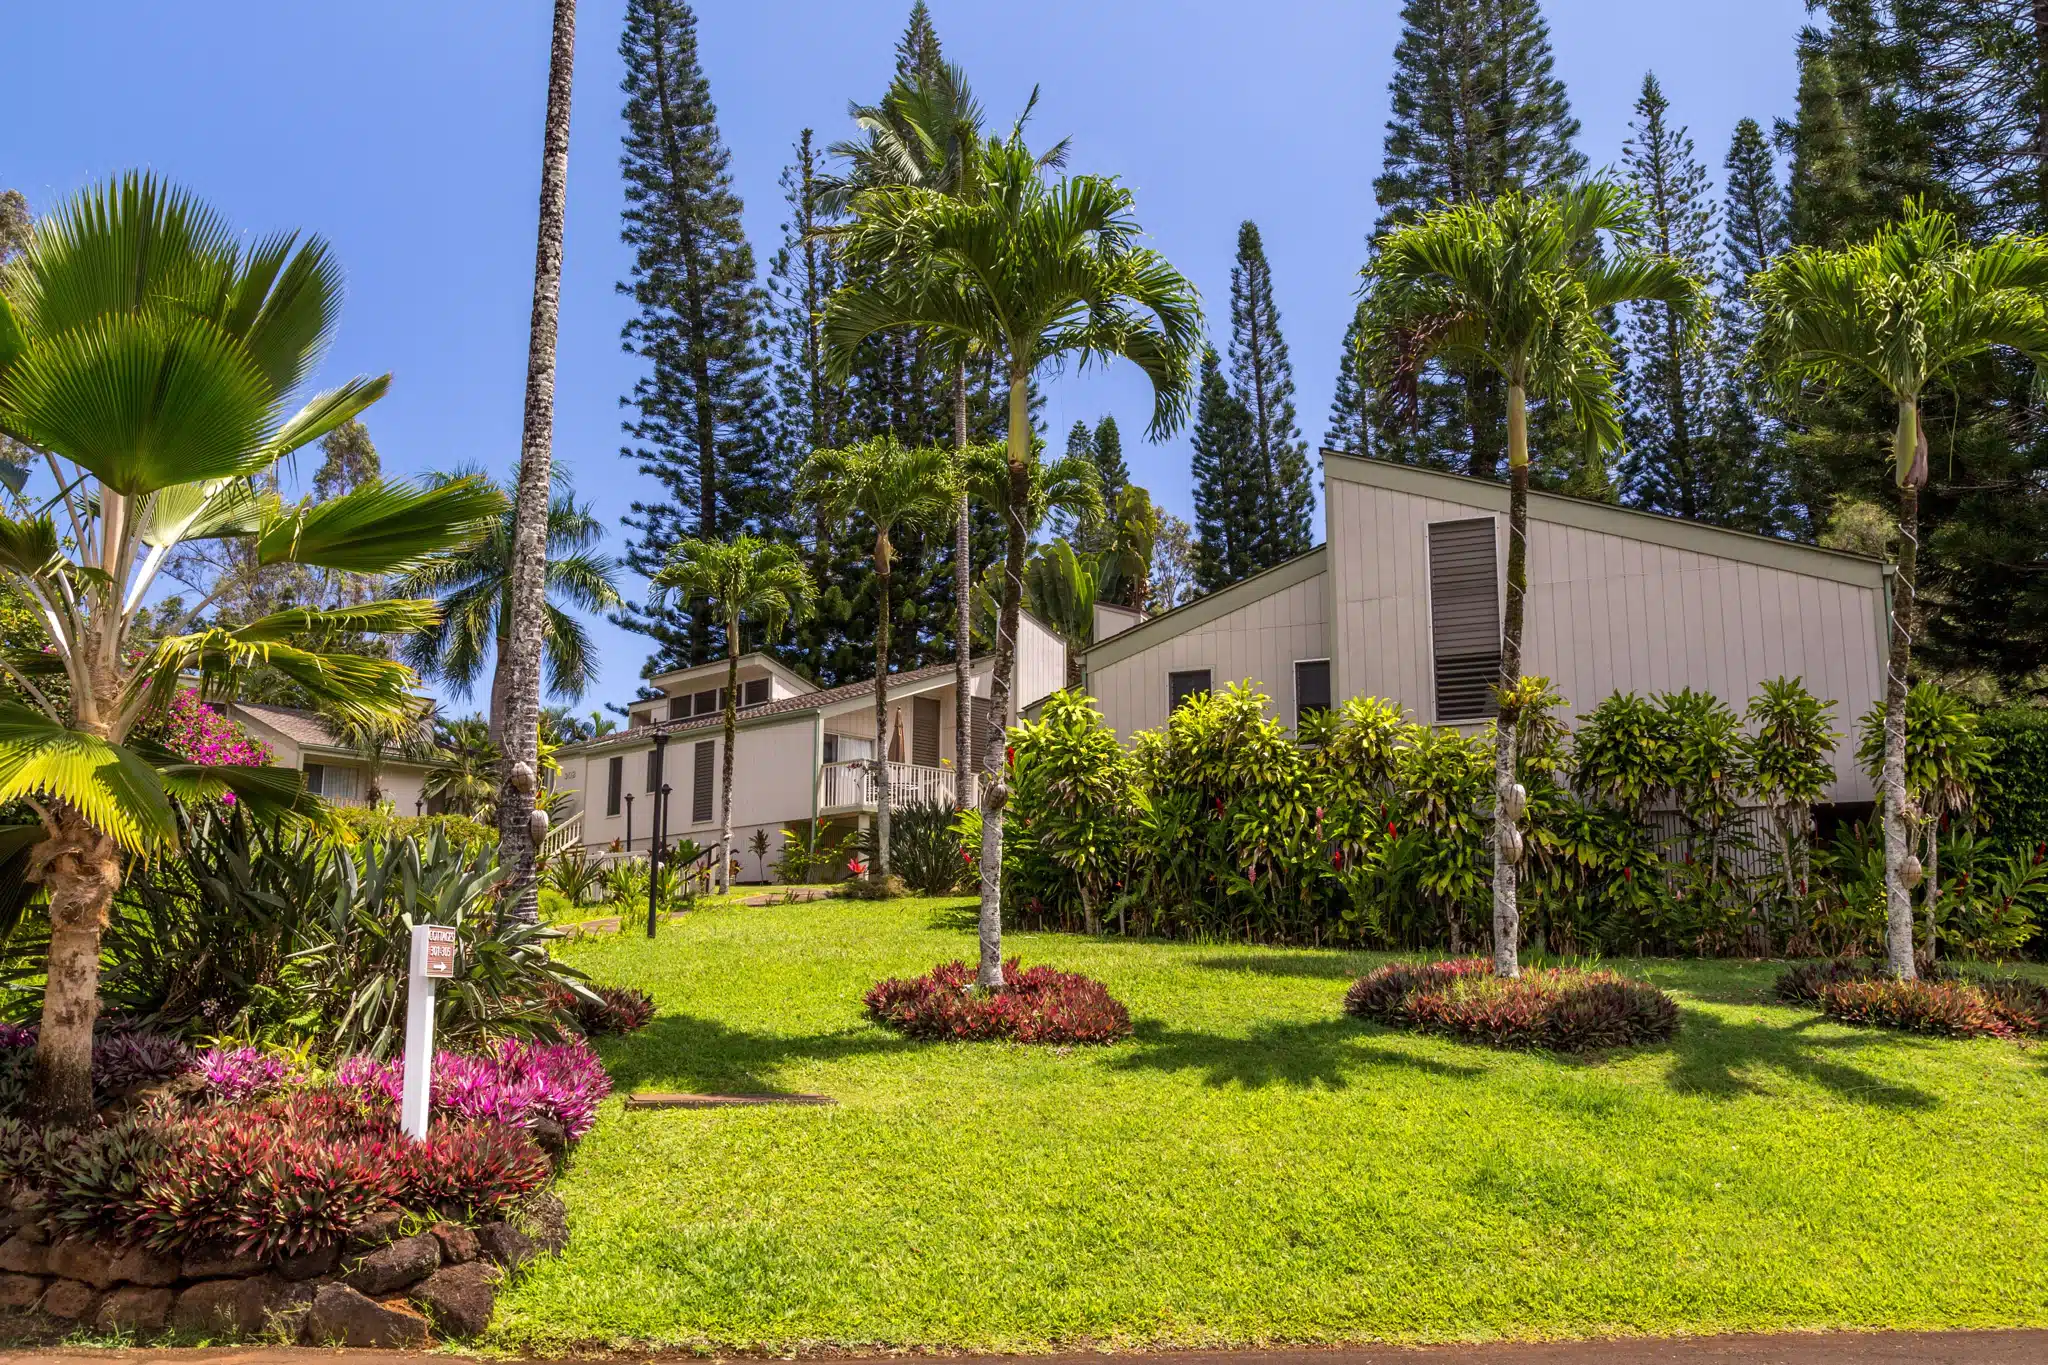 Makai Club Resort is a Hotel located in the city of Princeville on Kauai, Hawaii